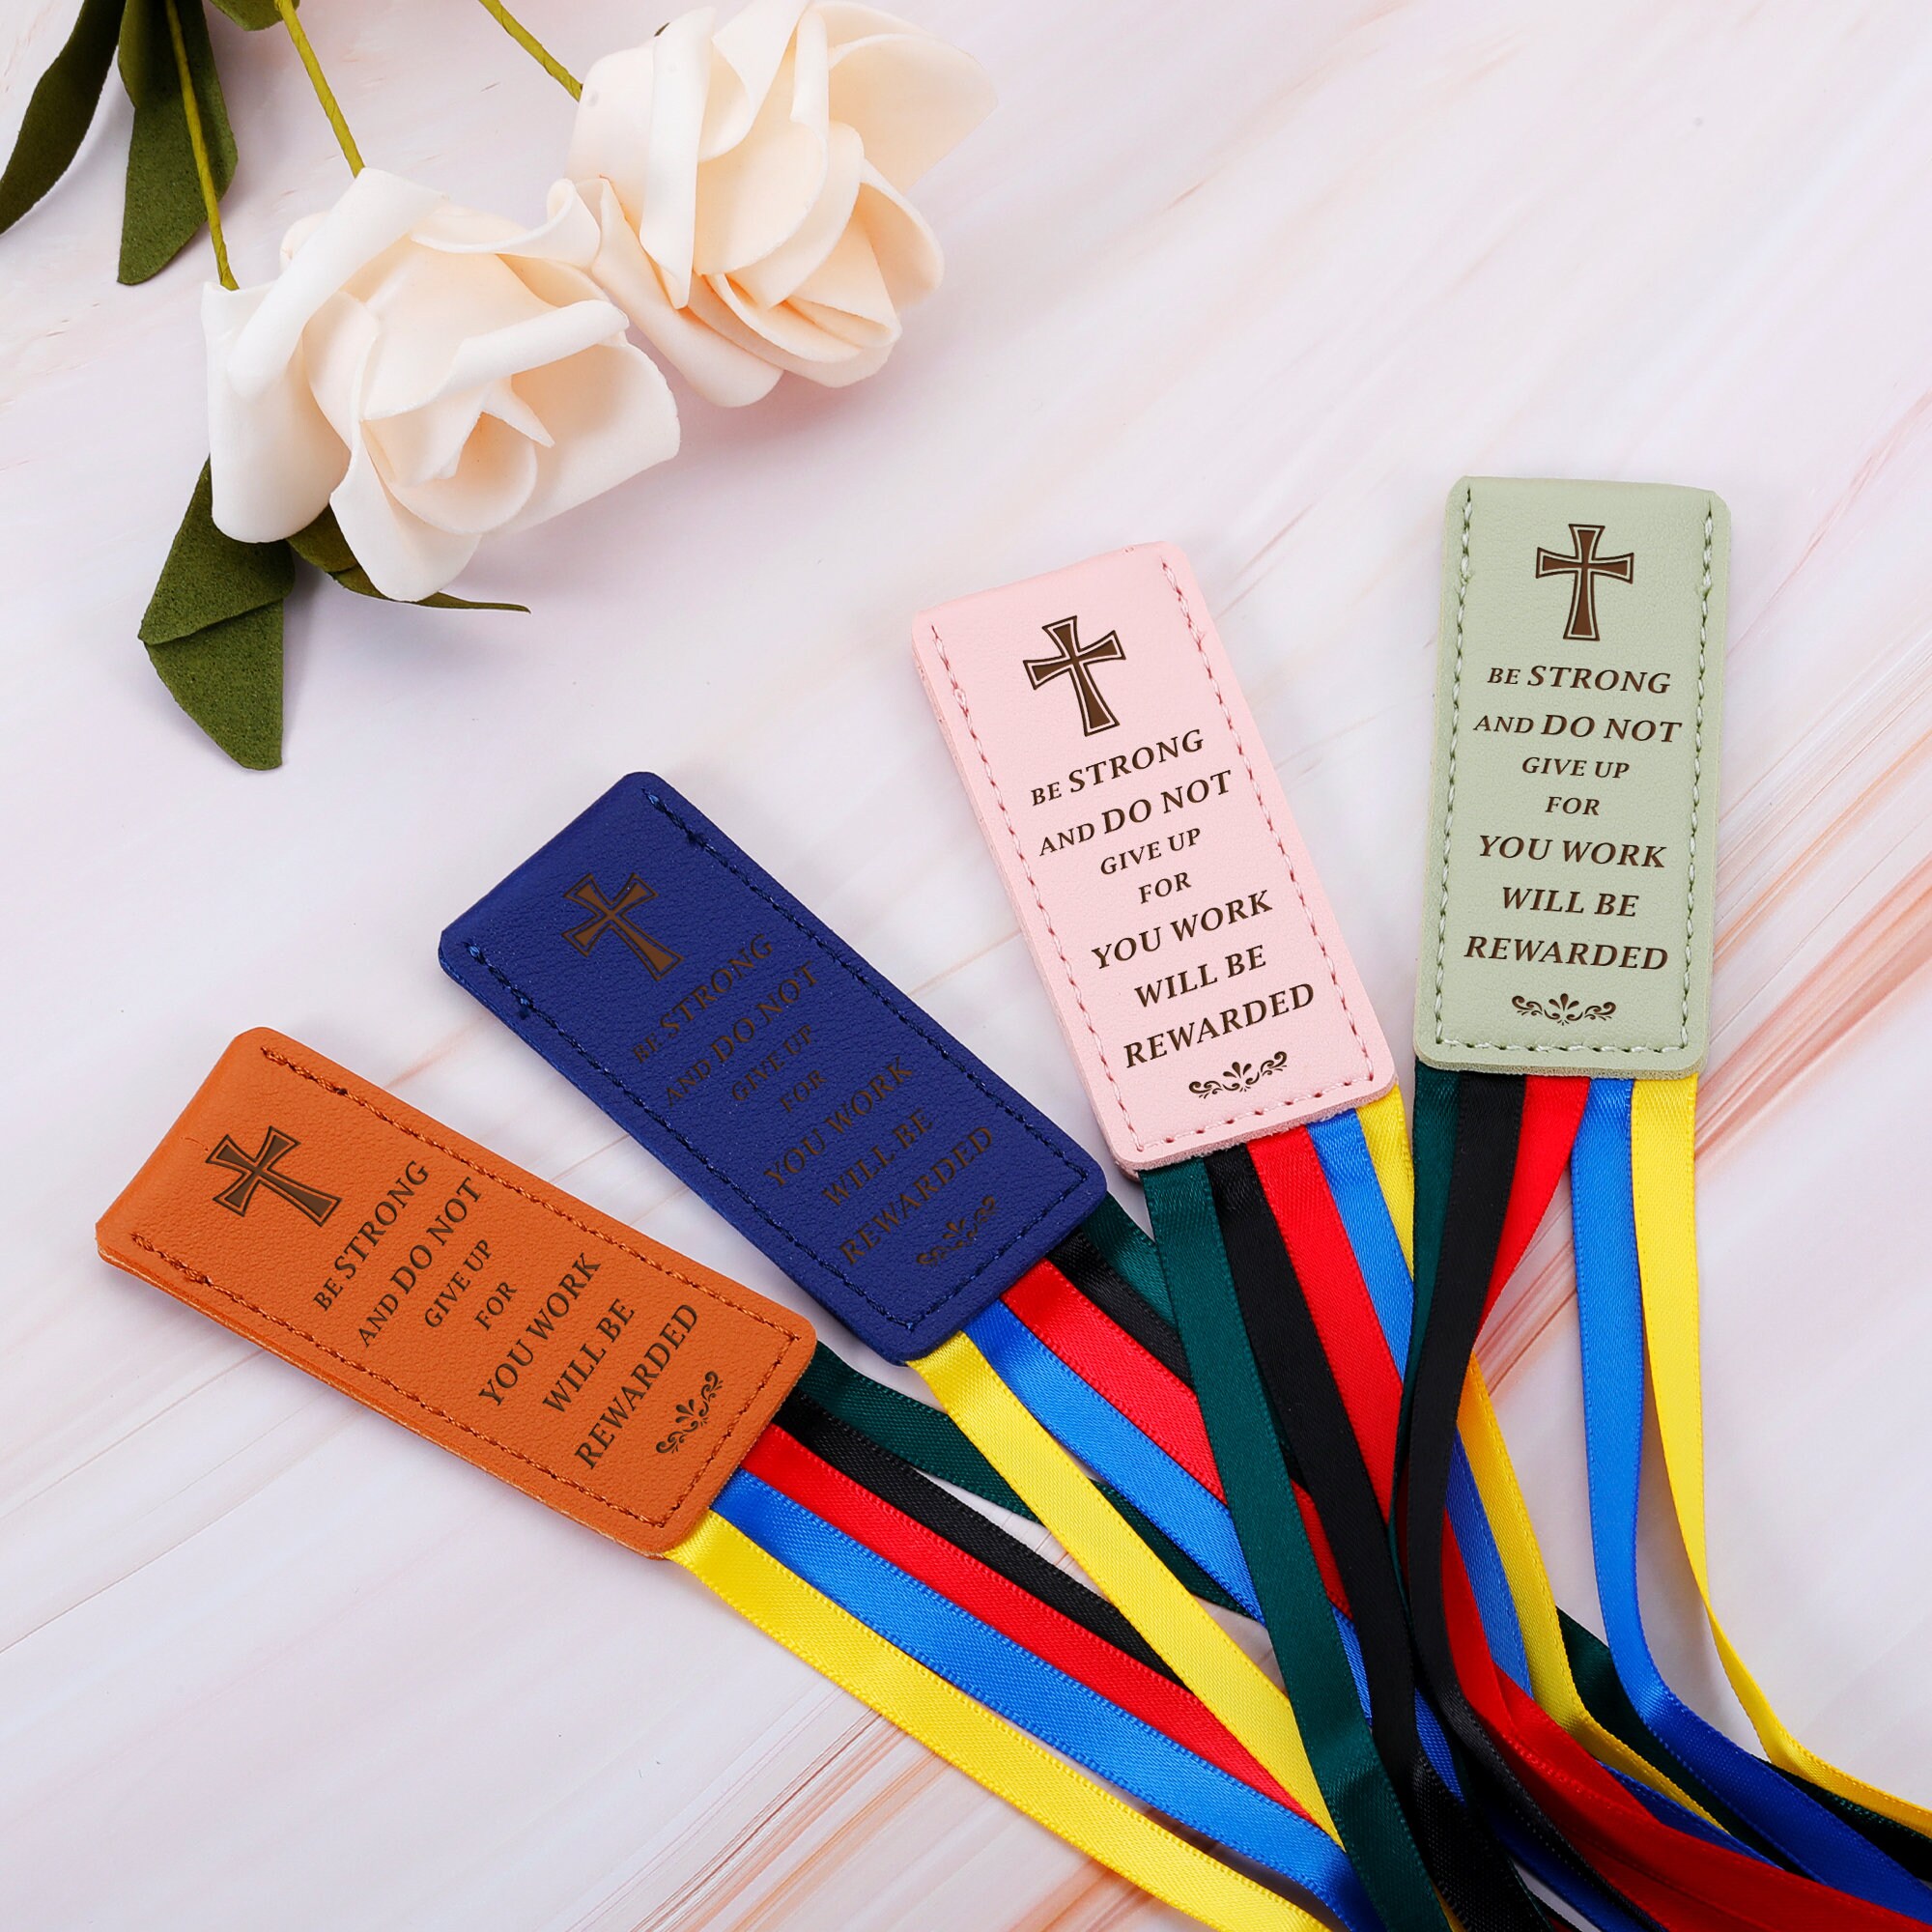 Bible bookmarks